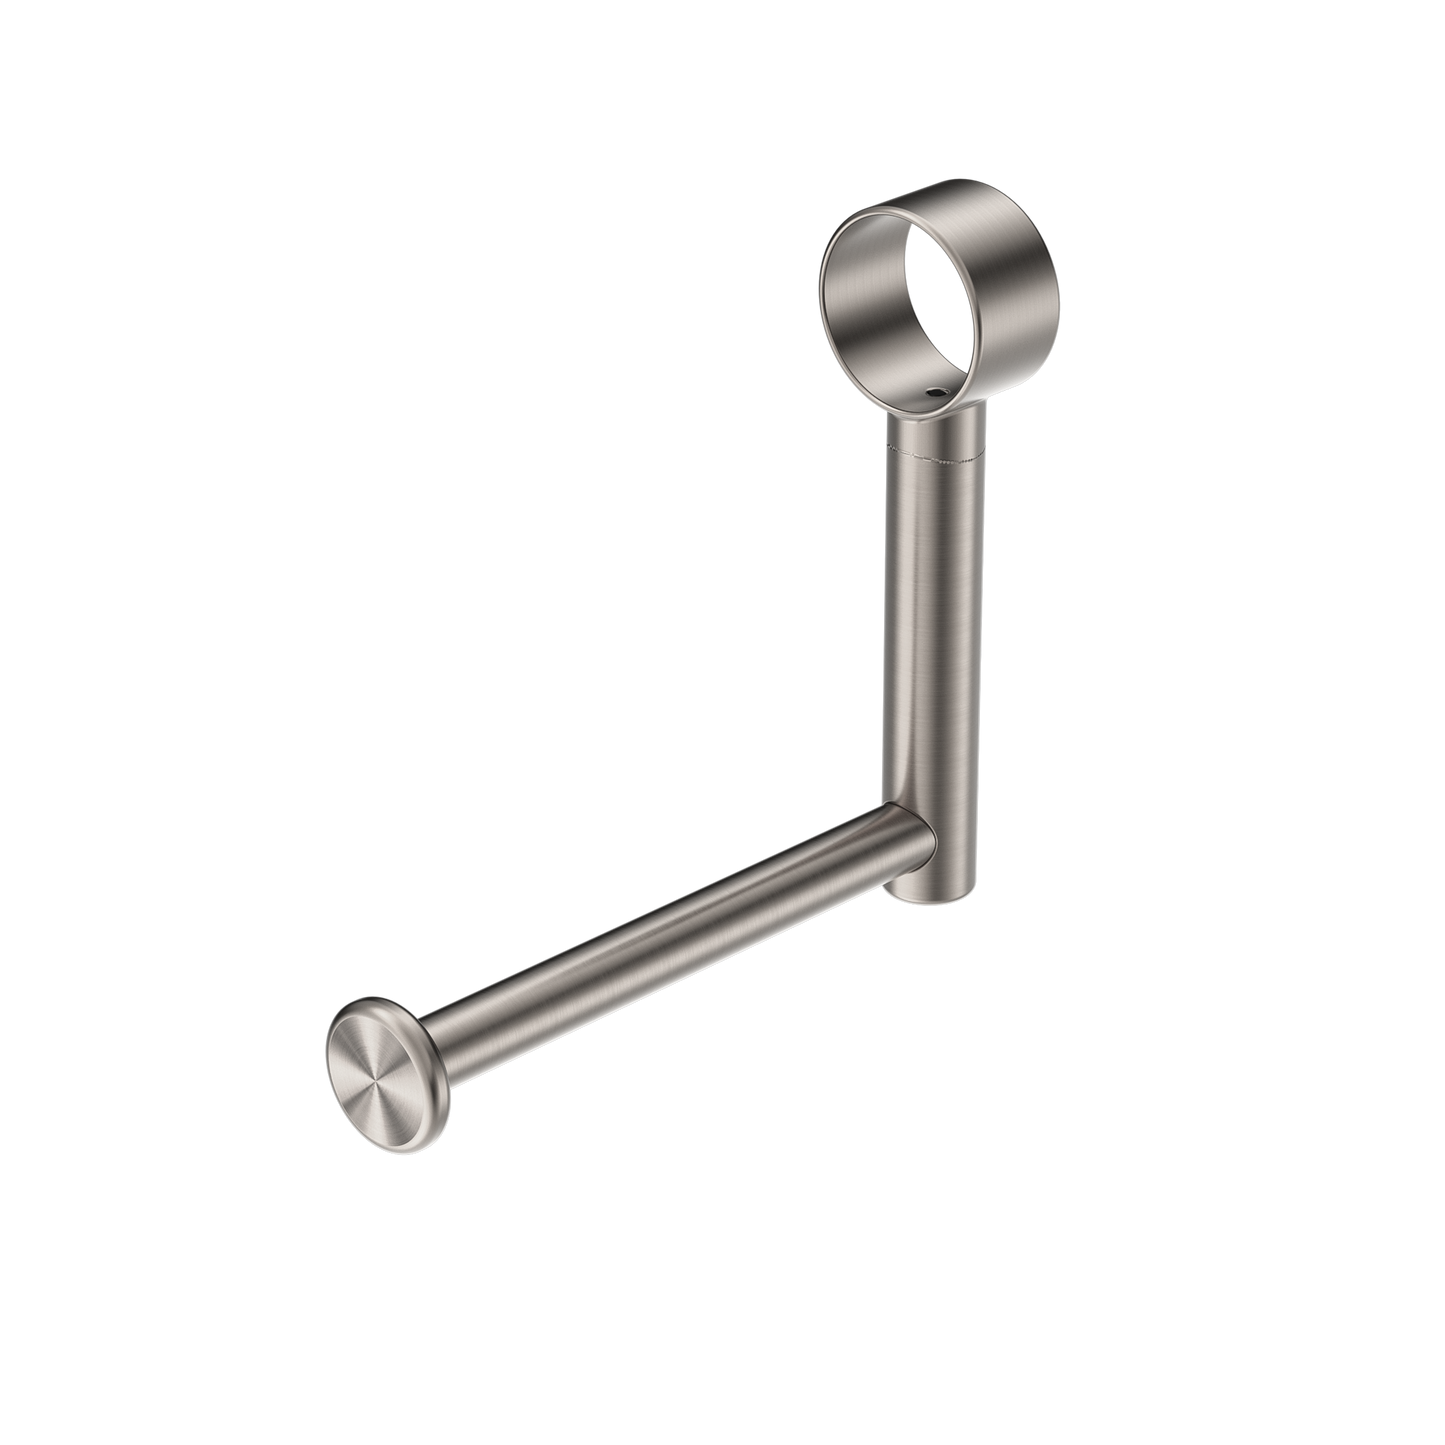 Calibre Mecca Add On Toilet Roll Holder Brushed Nickel - NRCR3286TBN